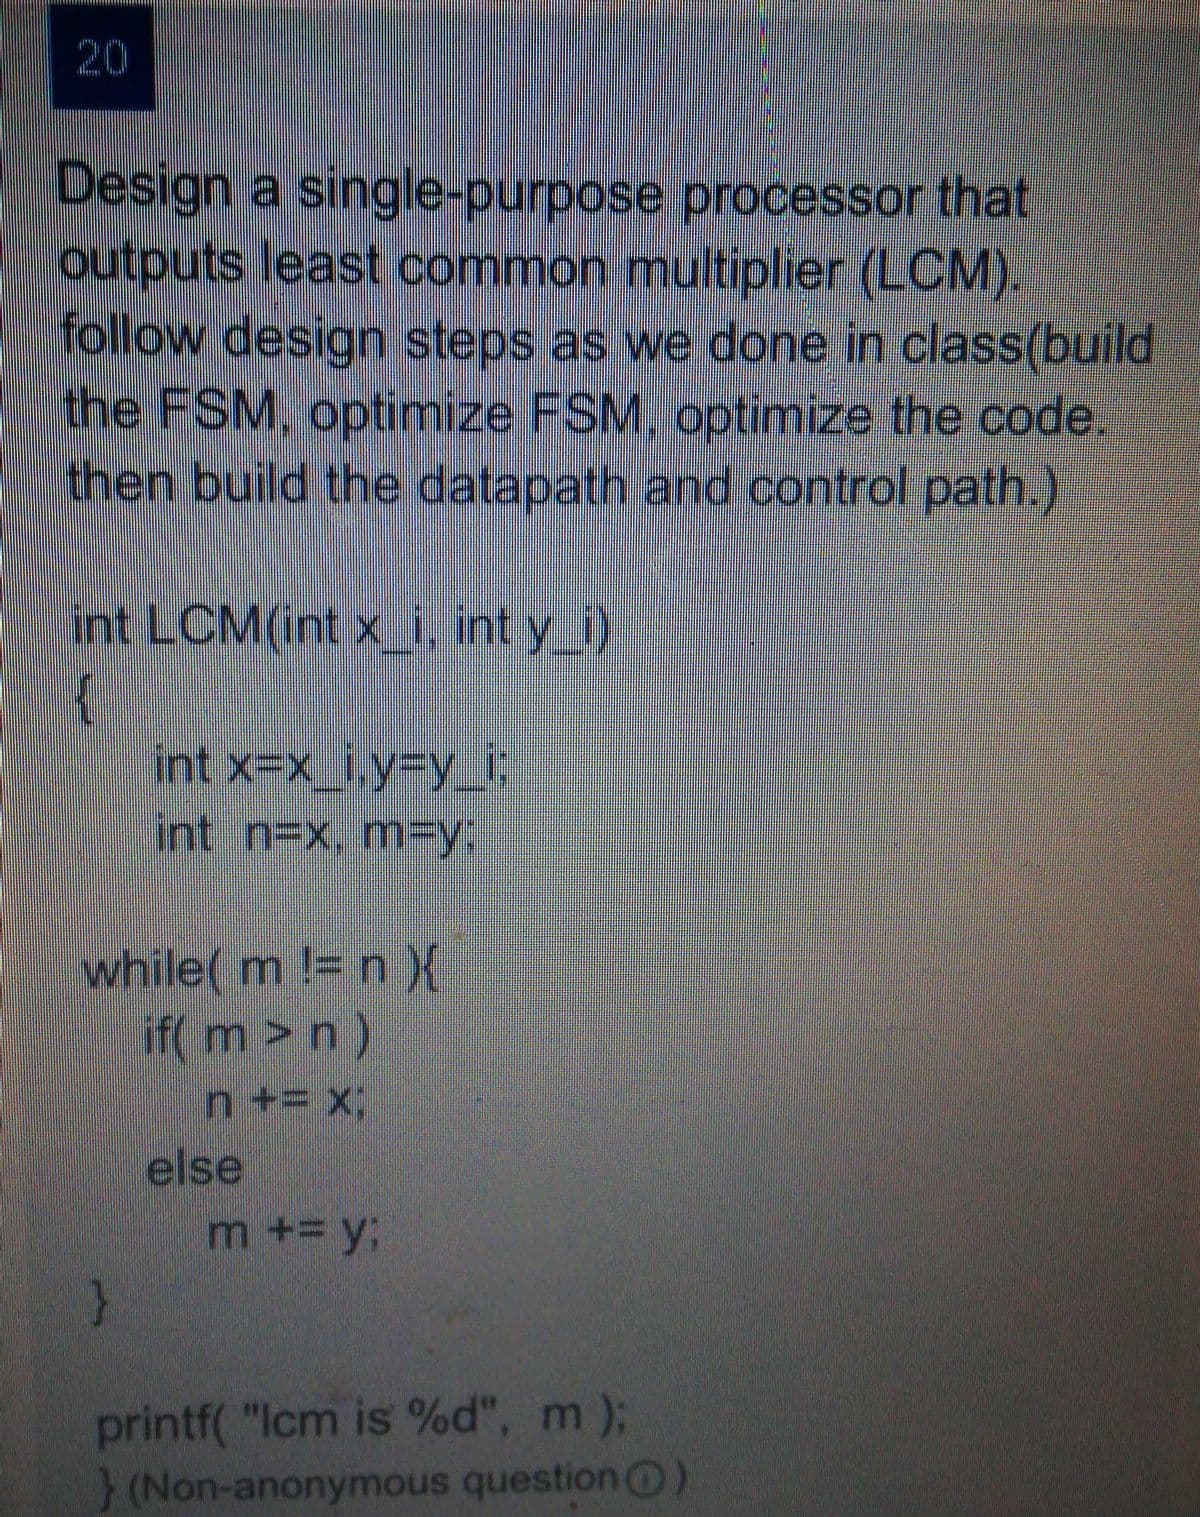 20
Design a single-purpose processor that
outputs least common multiplier (LCM).
follow design steps as we done in class(build
the FSM, optimize FSM. optimize the code.
then build the datapath and control path.)
int LCM(int x_i int y_)
{
int x=x_i,Y3DY_i;
int n=x, mFy:
while( m != n X
if( m>n)
n += x:
else
m += y3;
}
printf( "Icm is %d", m);
} (Non-anonymous question O
